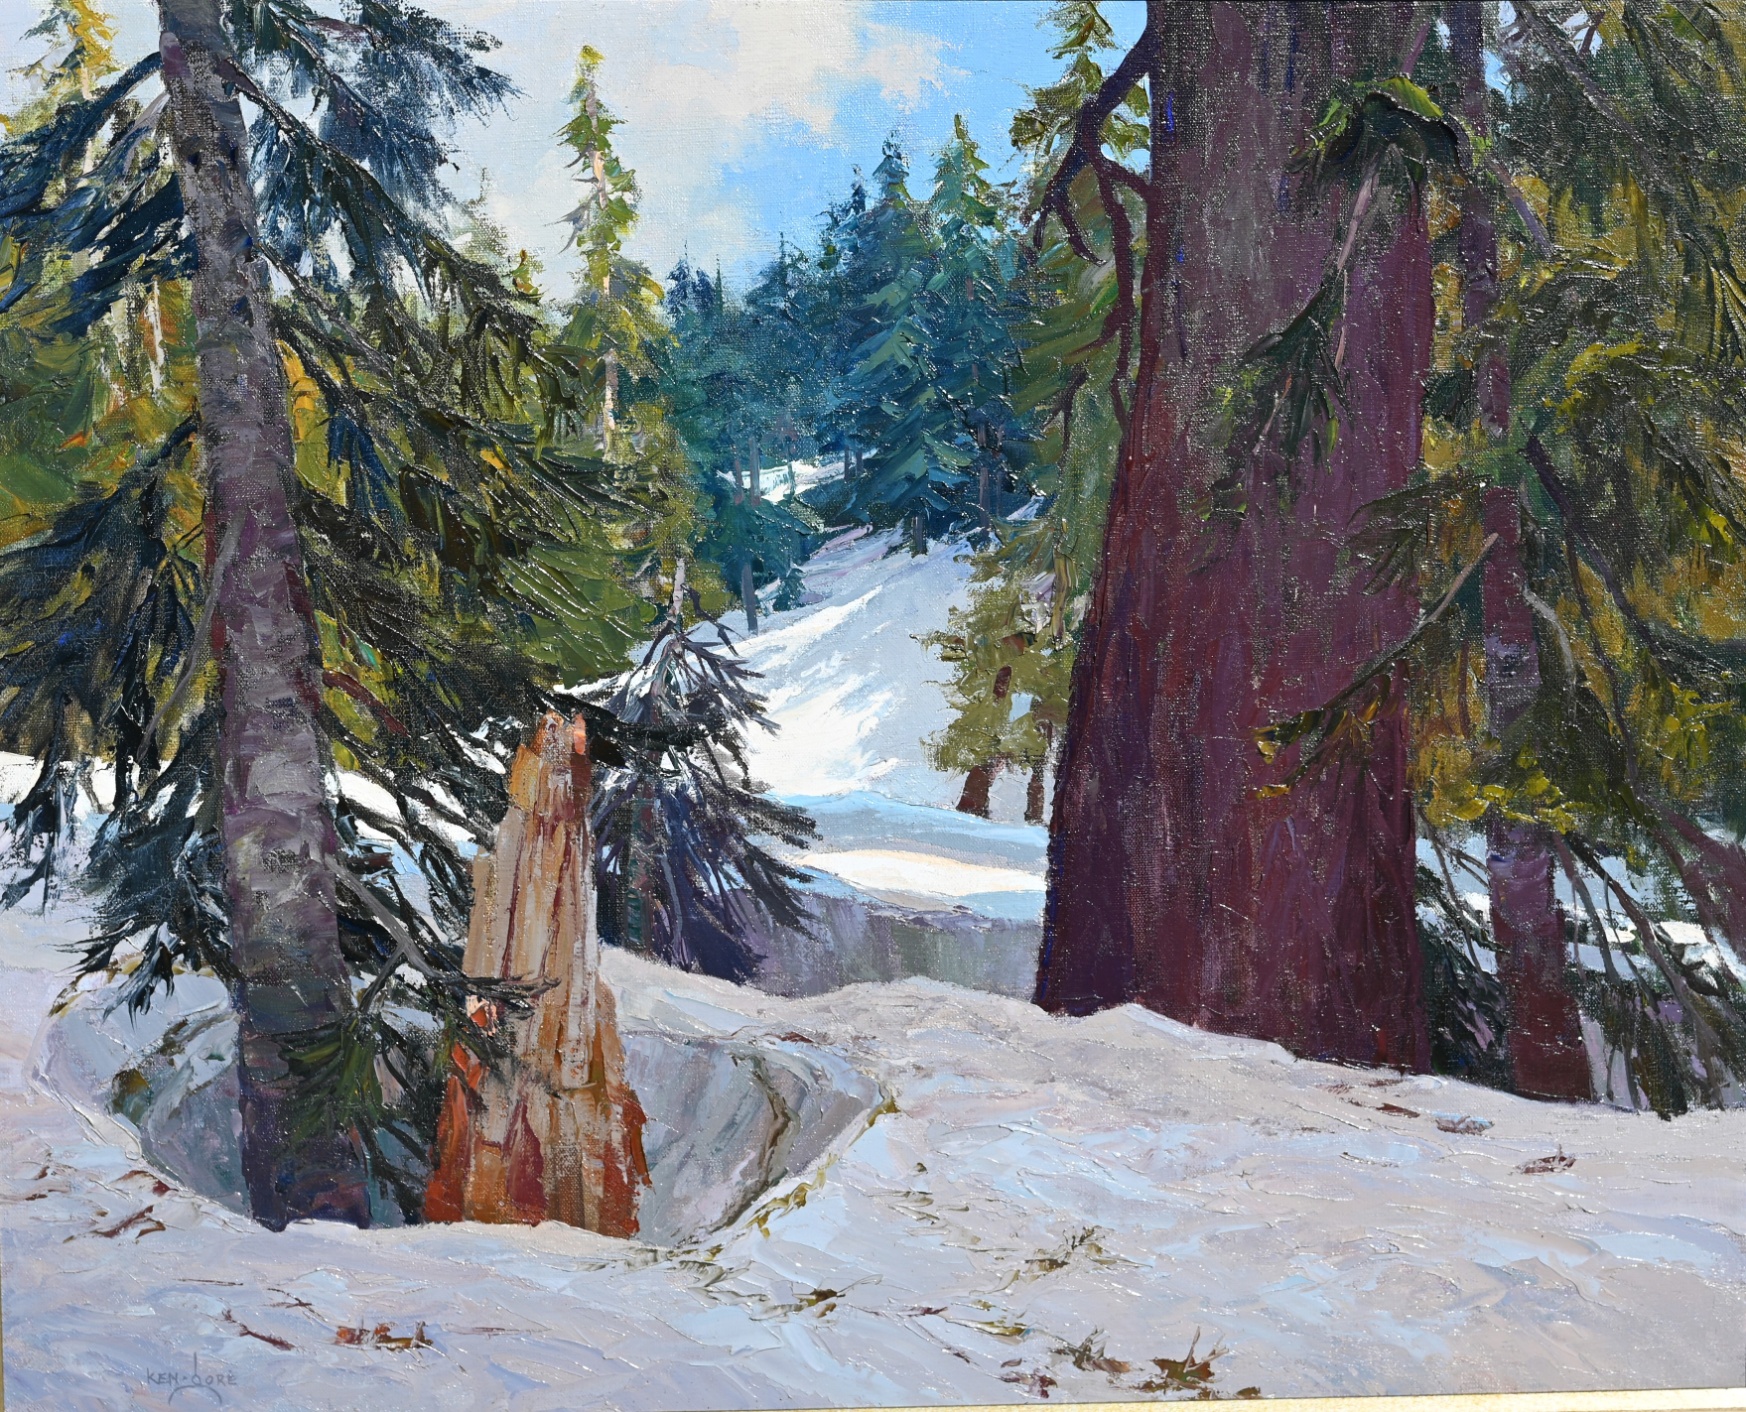 Ken Gore (1911 - 1990) "Snow at Cayuse Pass" - Image 4 of 8